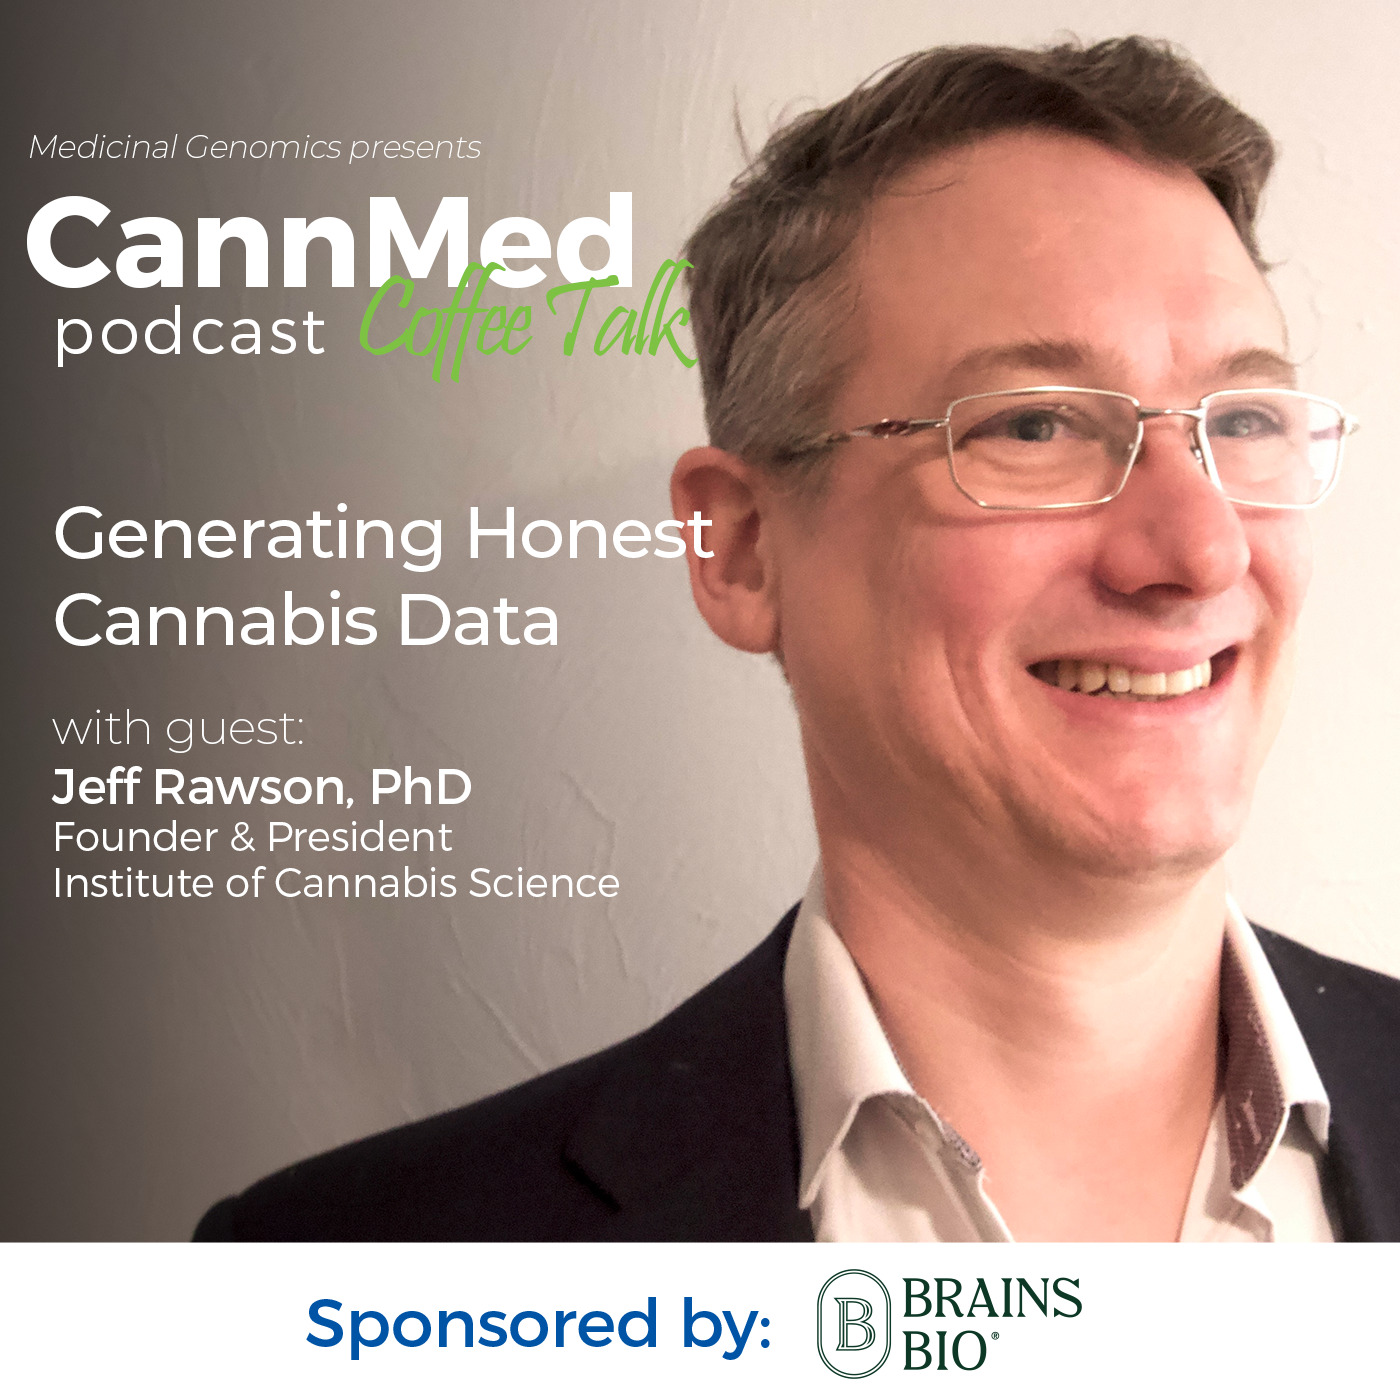 Featured image for “Generating Honest Cannabis Data with Jeff Rawson, PhD”